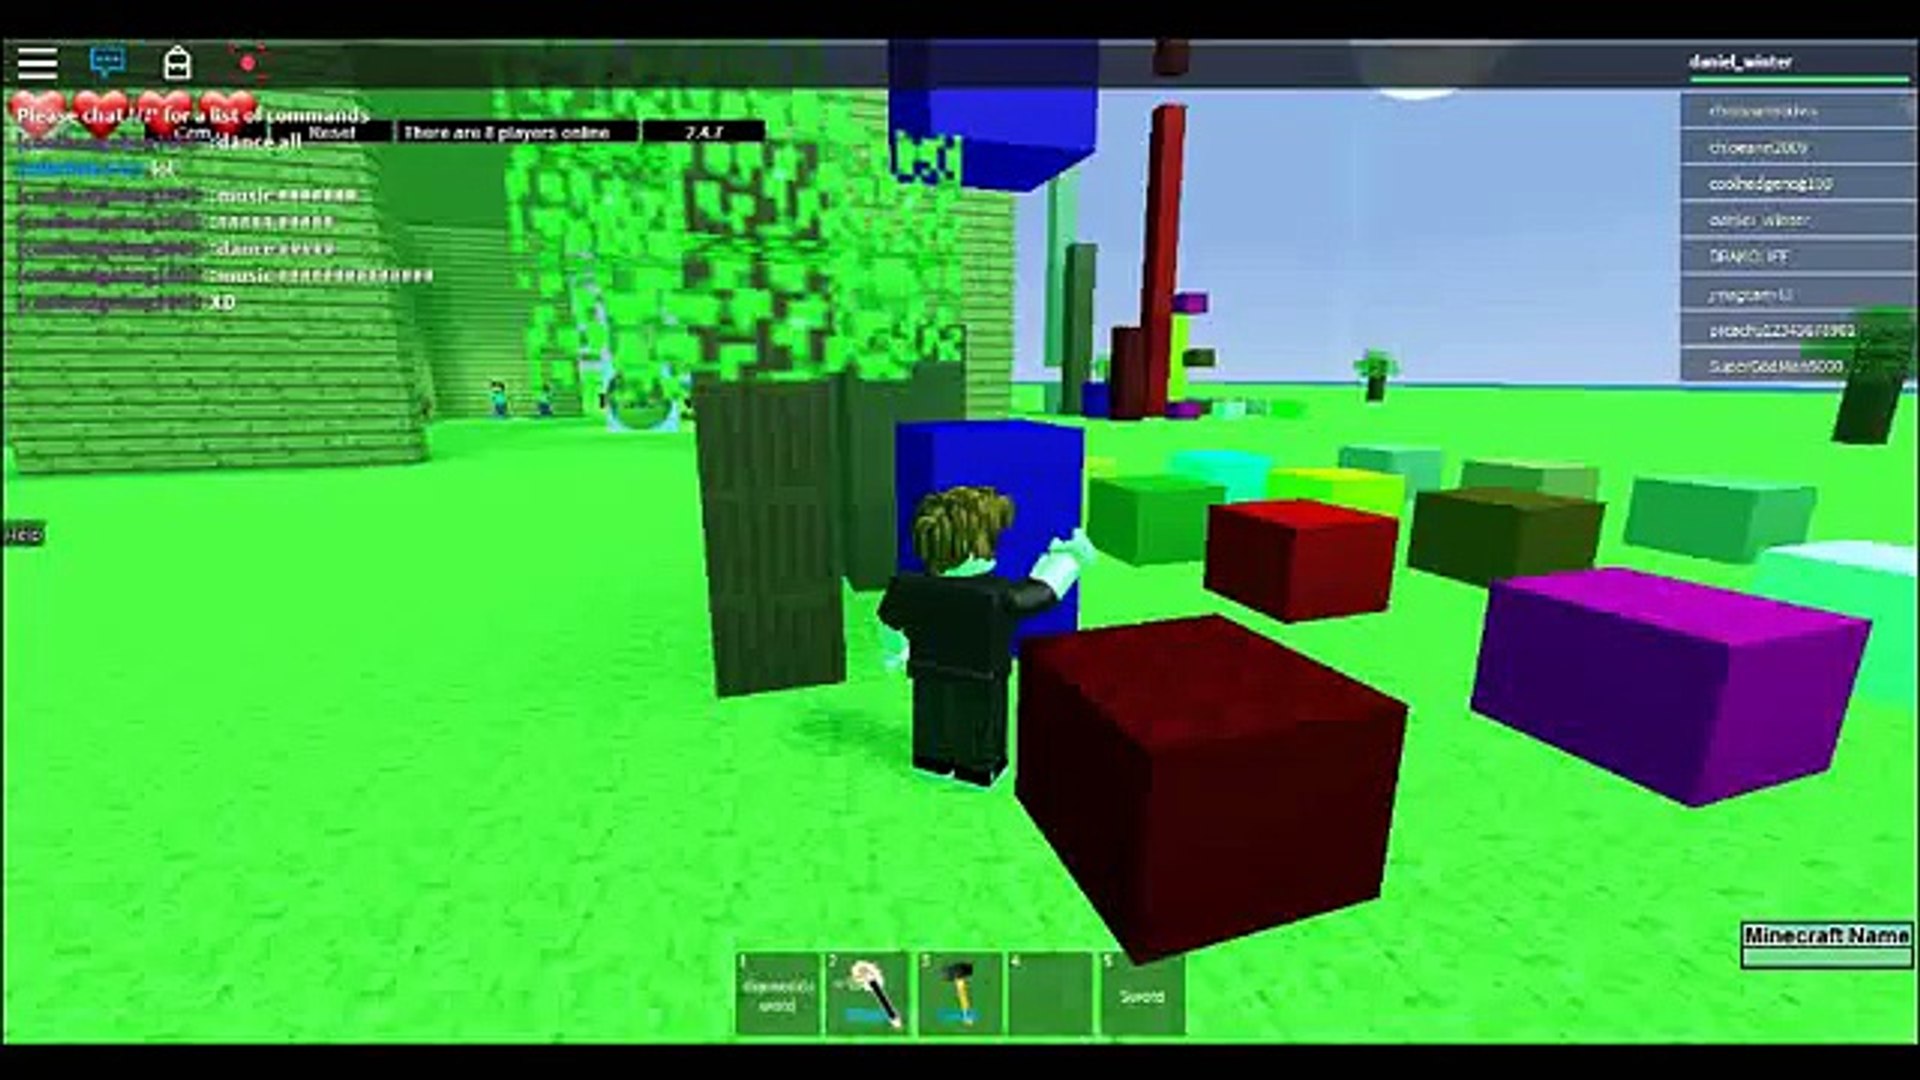 Roblox Vs Minecraft Roblox Par 1 - roblox is better than minecraft video dailymotion